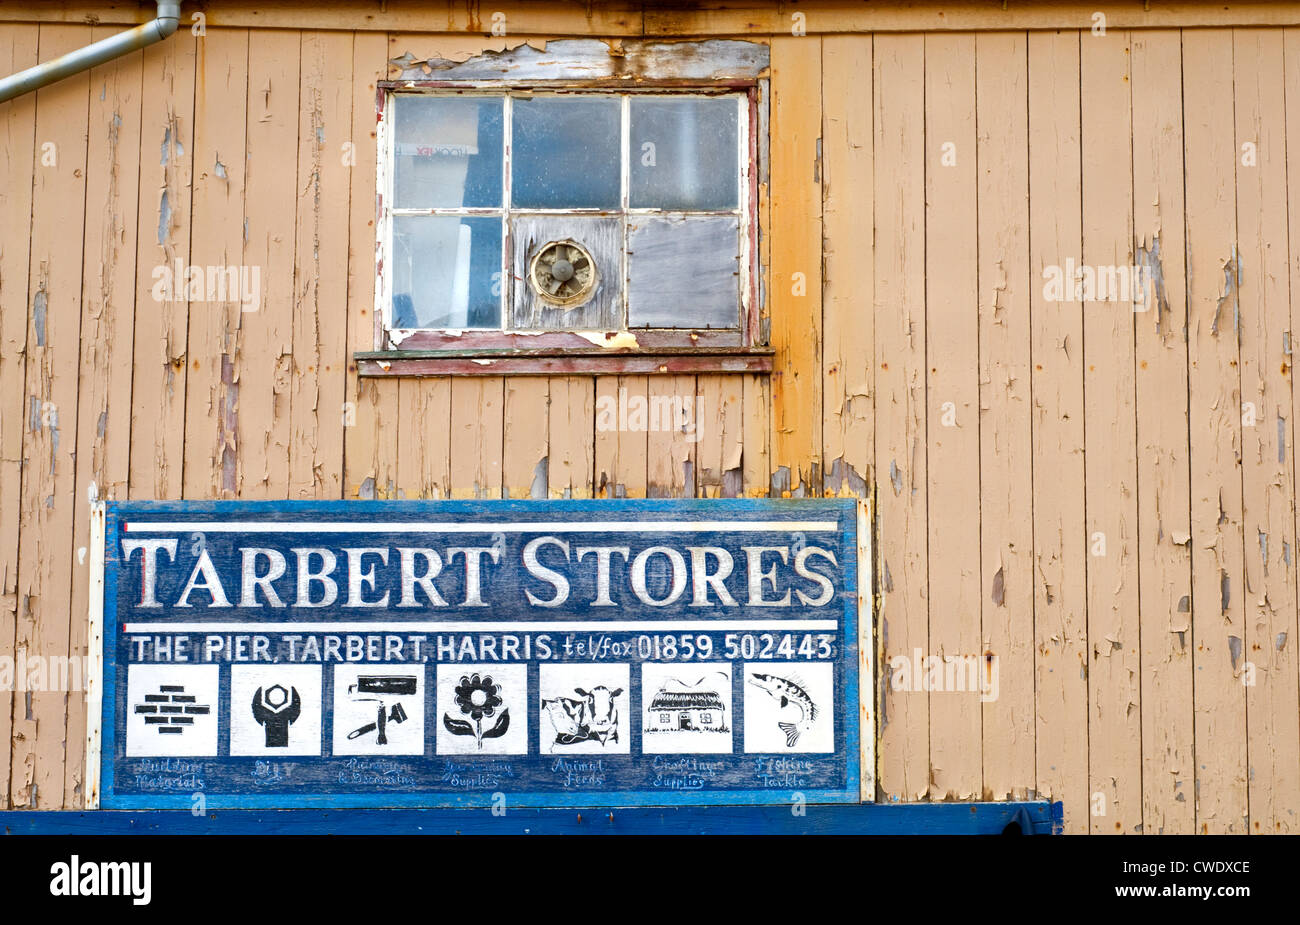 A shop in the town of Tarbert on the Isle of Harris, Outer Hebrides, Scotland, UK Stock Photo